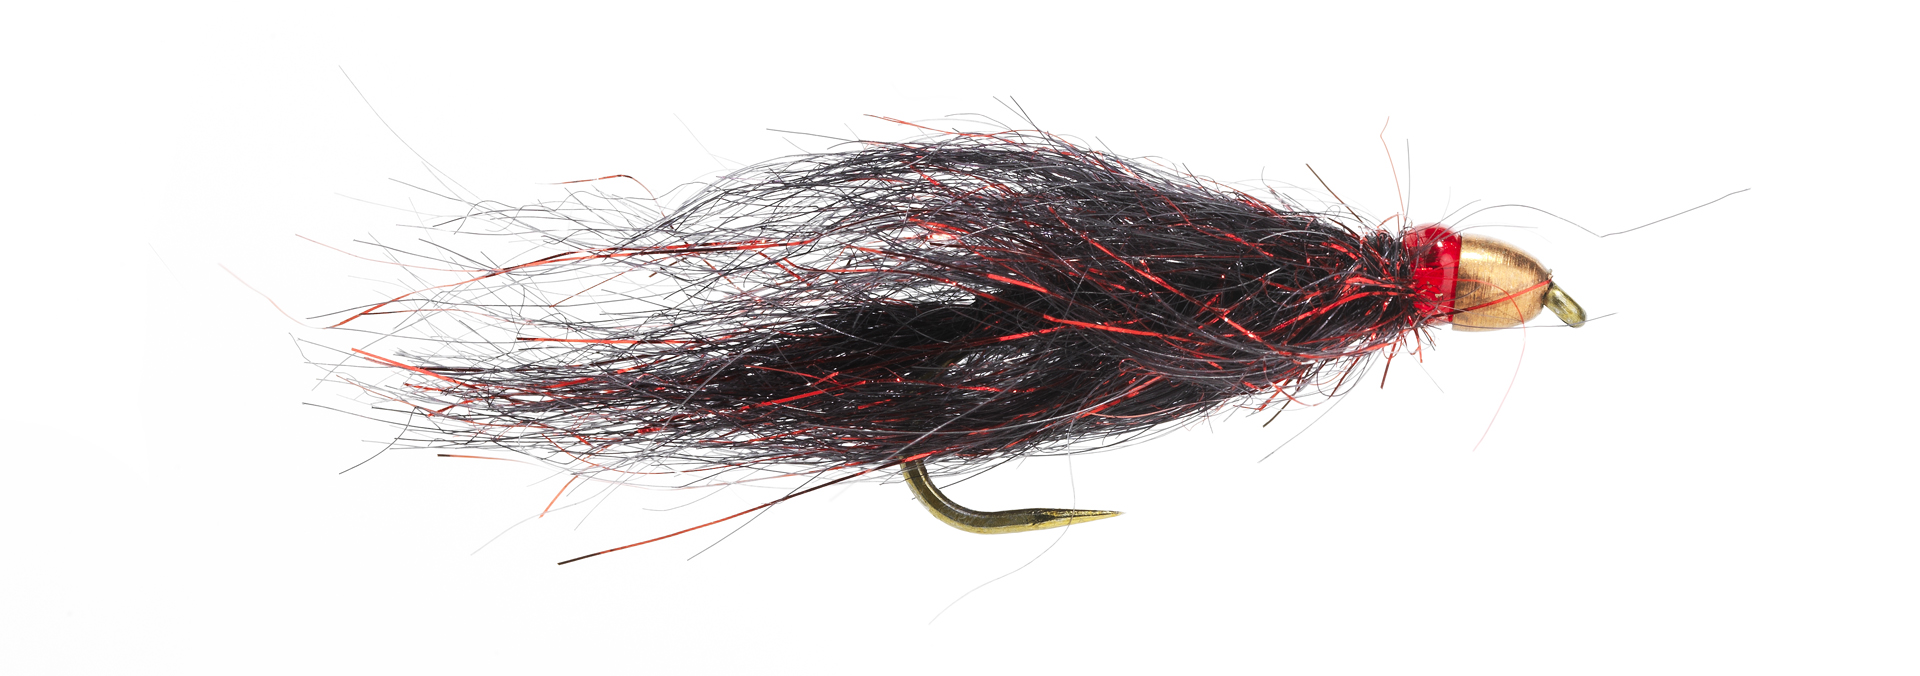 FLY FISHING PREMIER SHOW: SHALLOW WATER LEECHES 